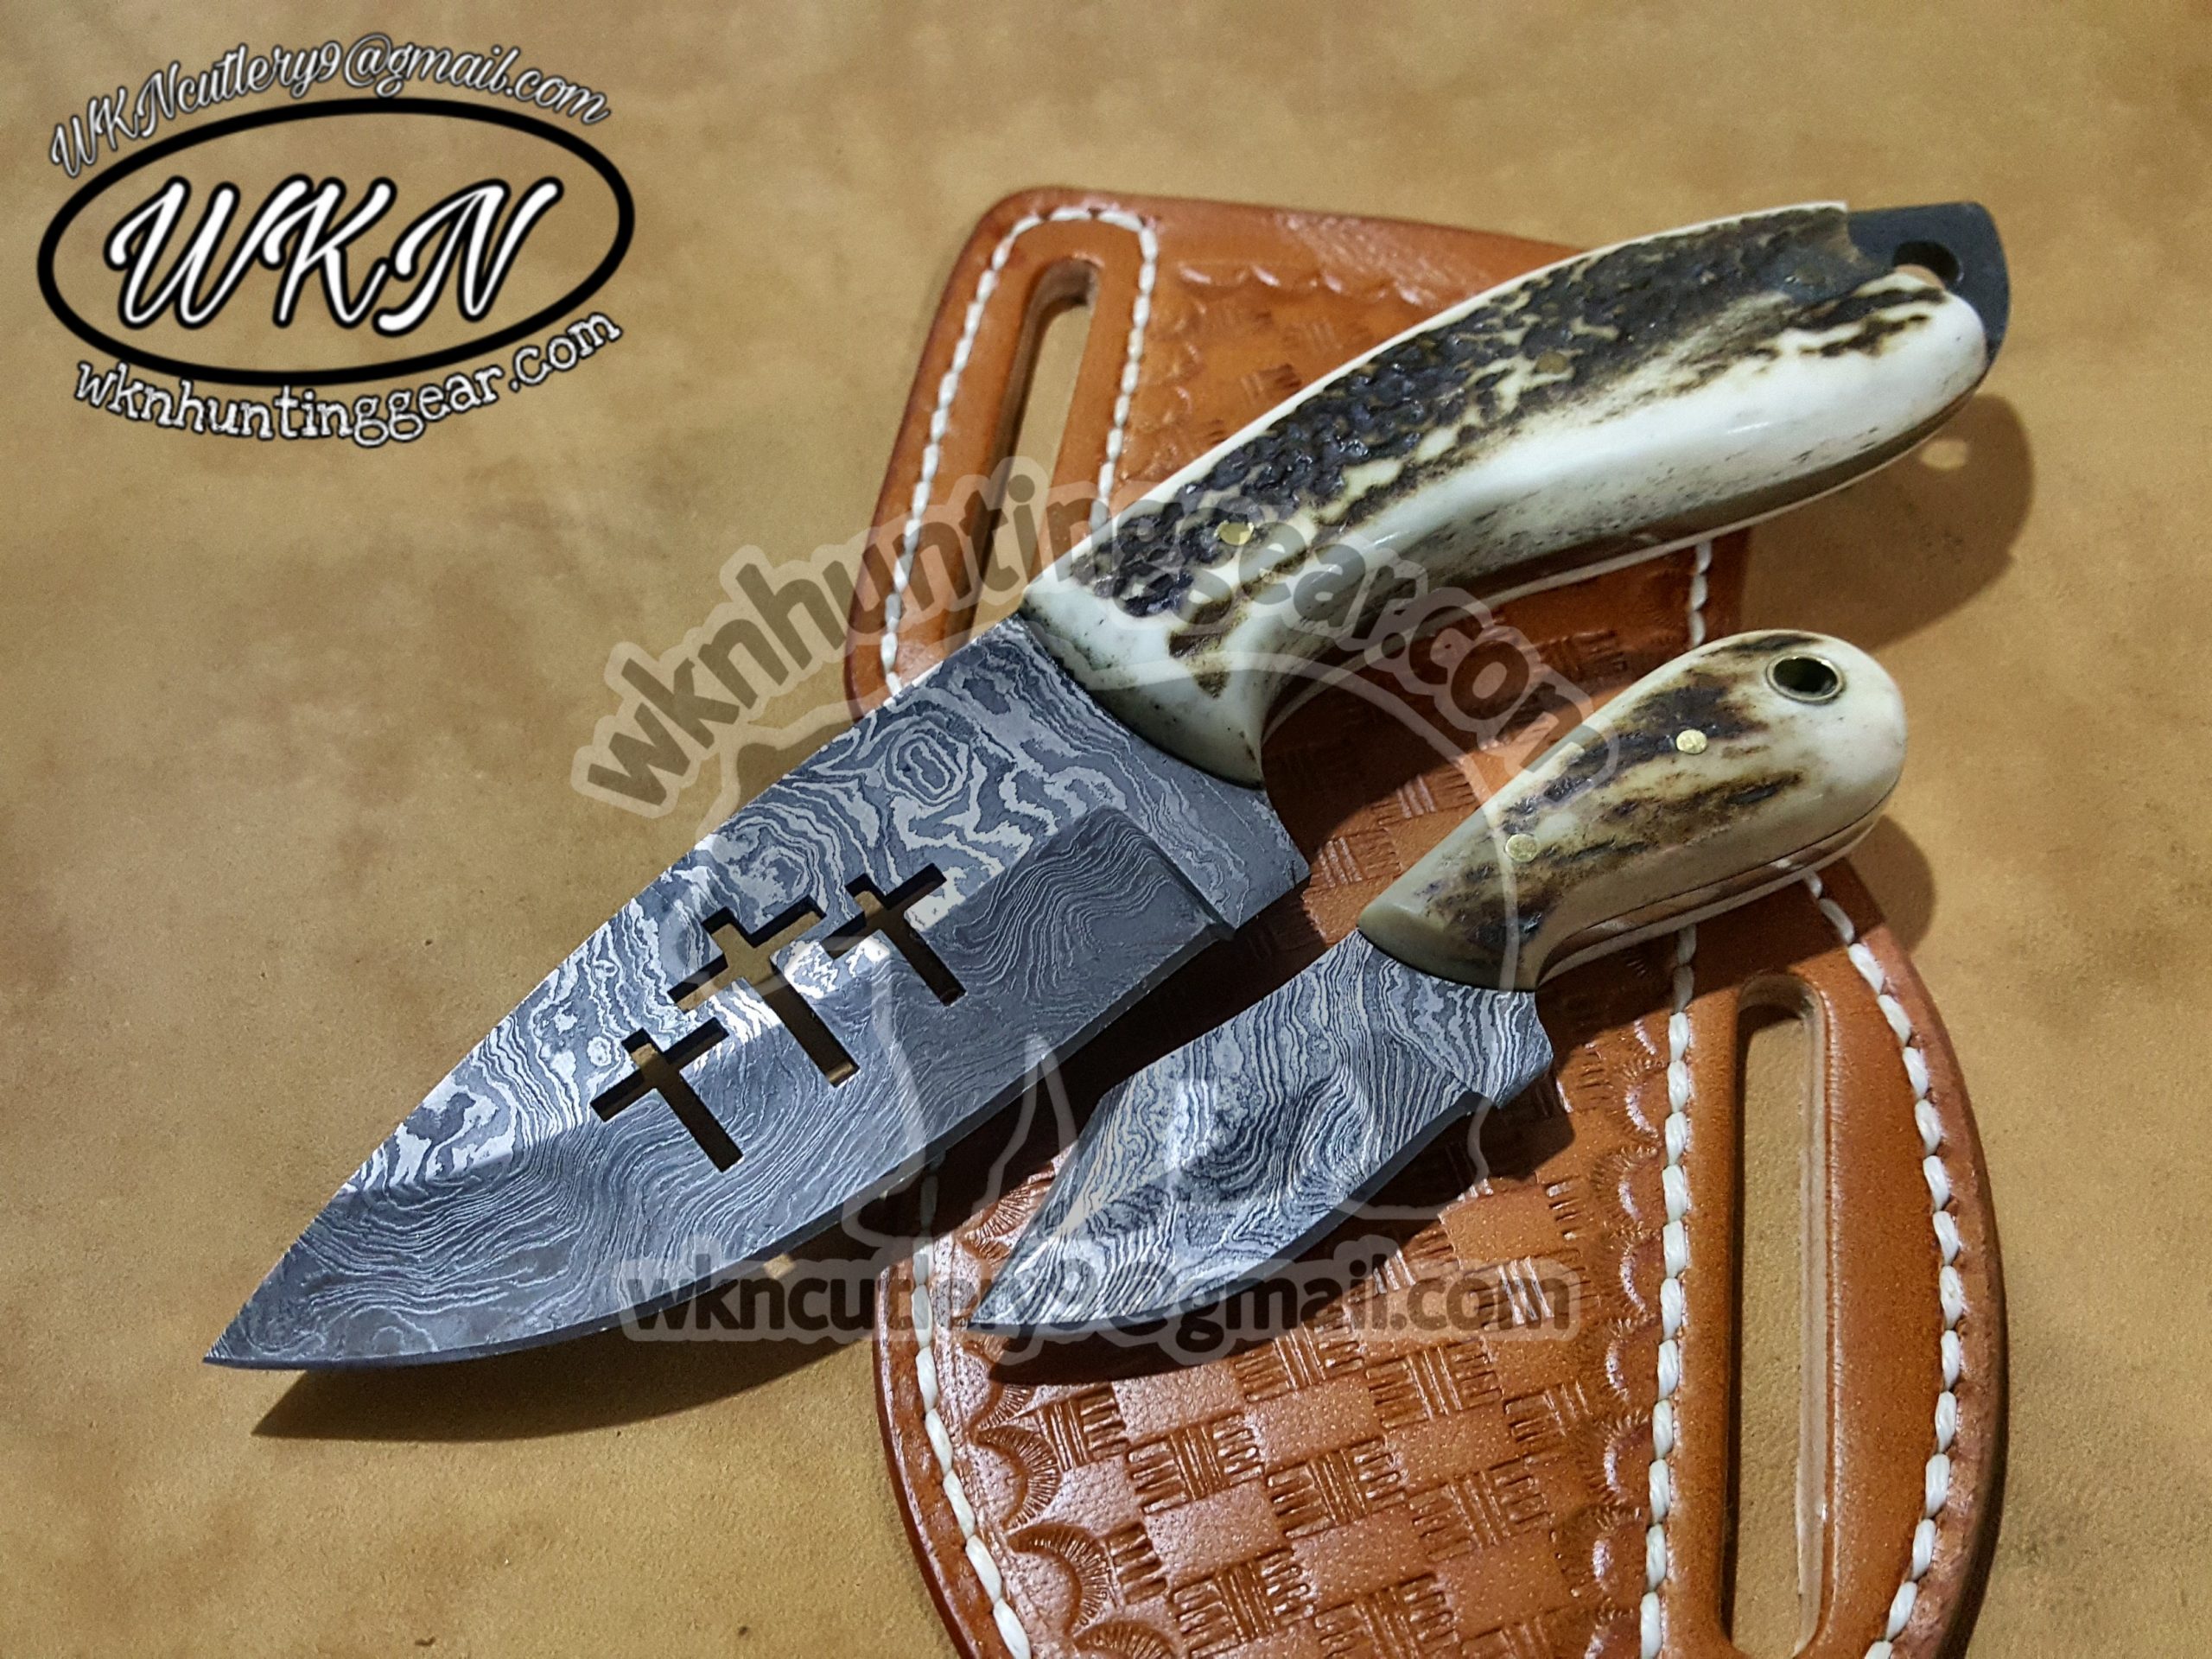 CowBoy Bull Cutter Knife Hand Forged Damascus Steel EDC Knife With  LeatherSheath